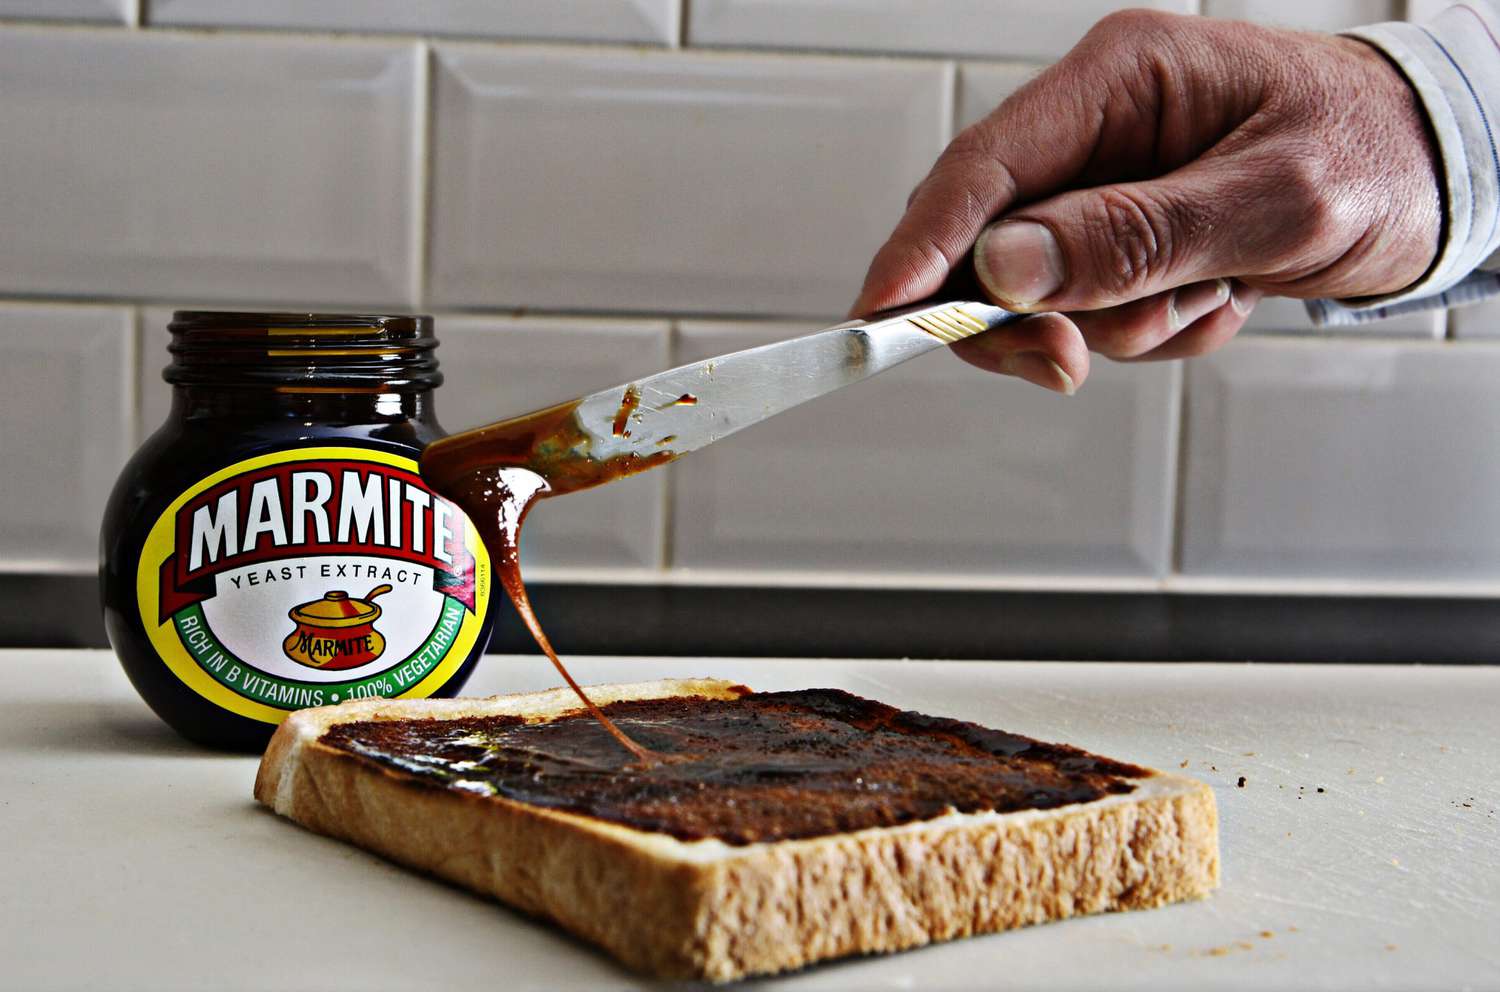 16-best-marmite-nutritional-facts